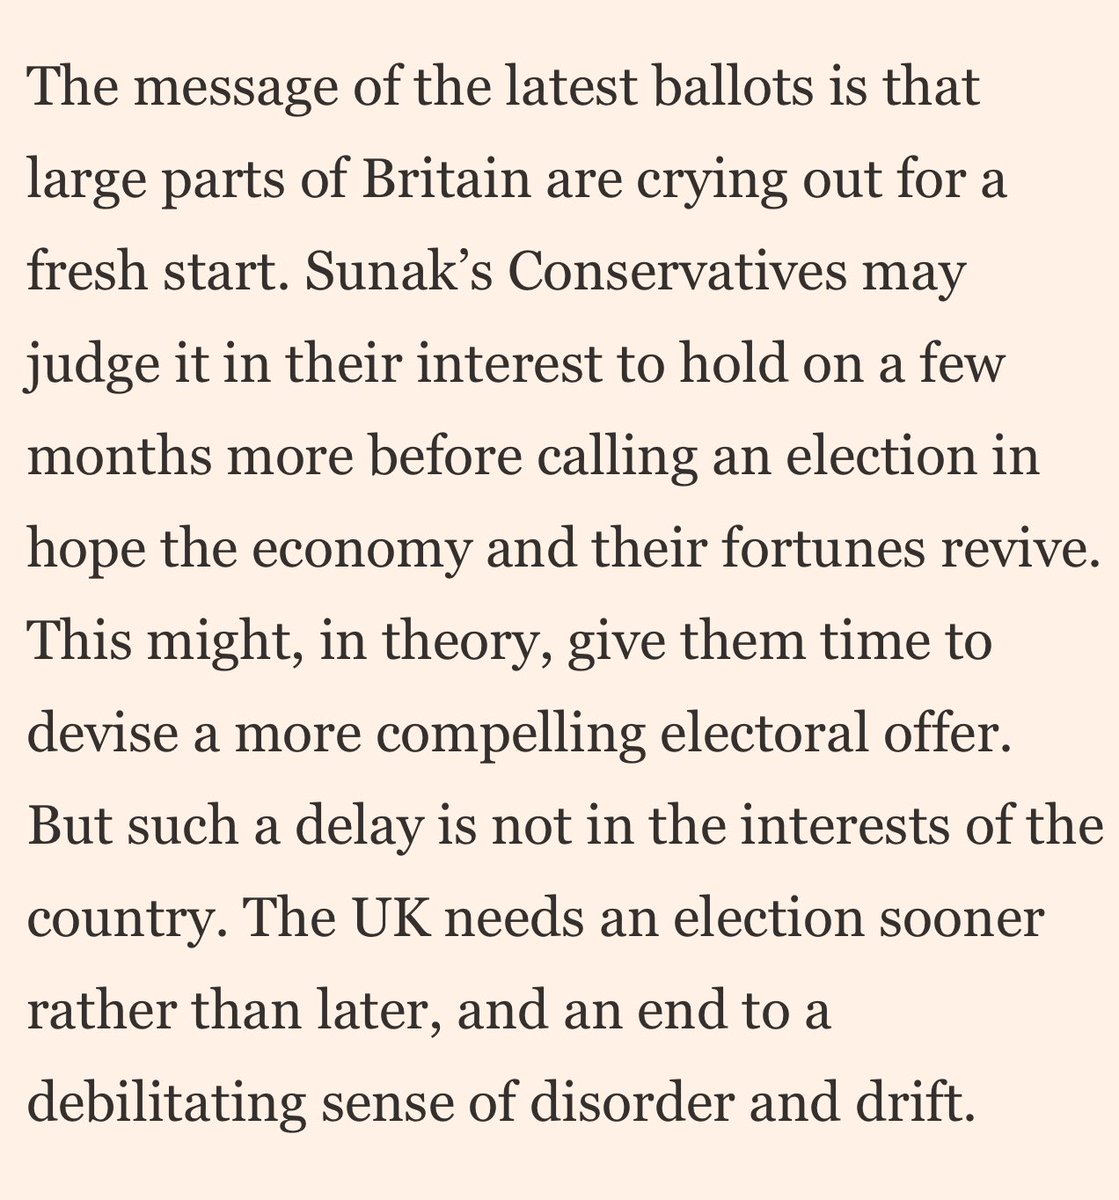 This is spot on @FT - the country needs change - to unlock new investment and new opportunity - the UK needs an election #GeneralElectionNOW